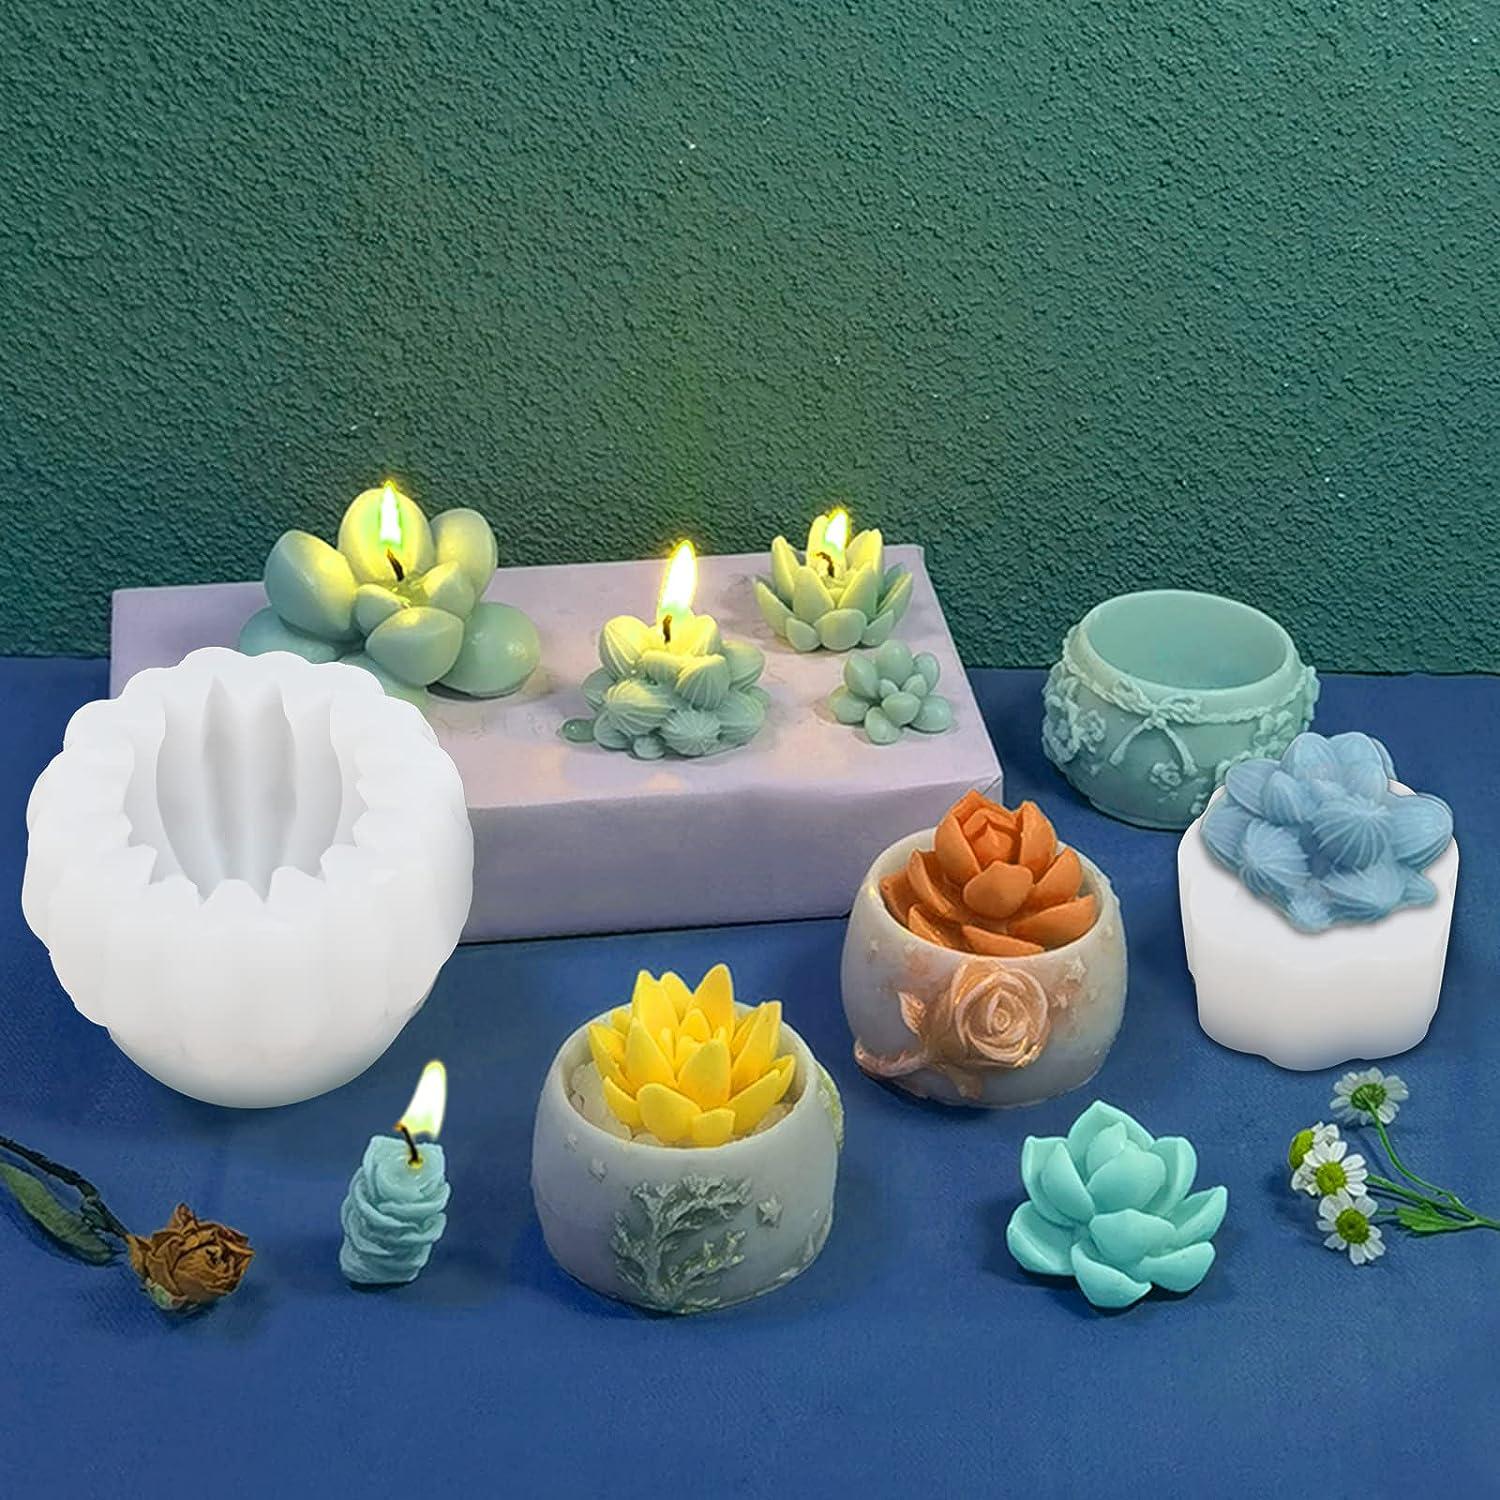 How To Make Silicone Molds For Resin Casting & Candle